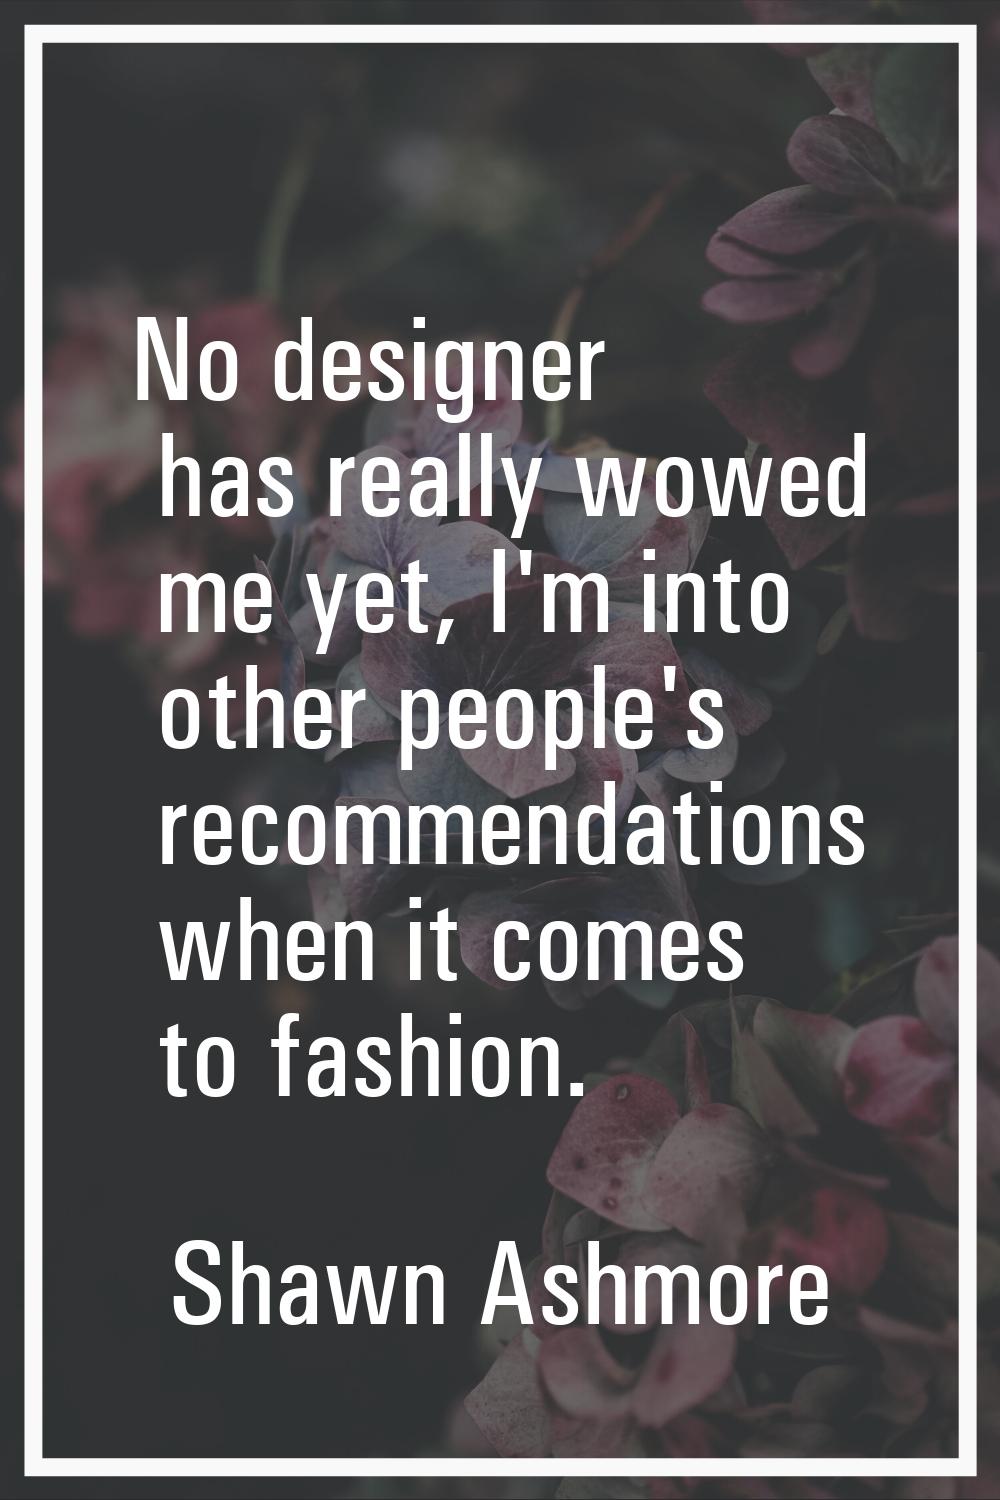 No designer has really wowed me yet, I'm into other people's recommendations when it comes to fashi